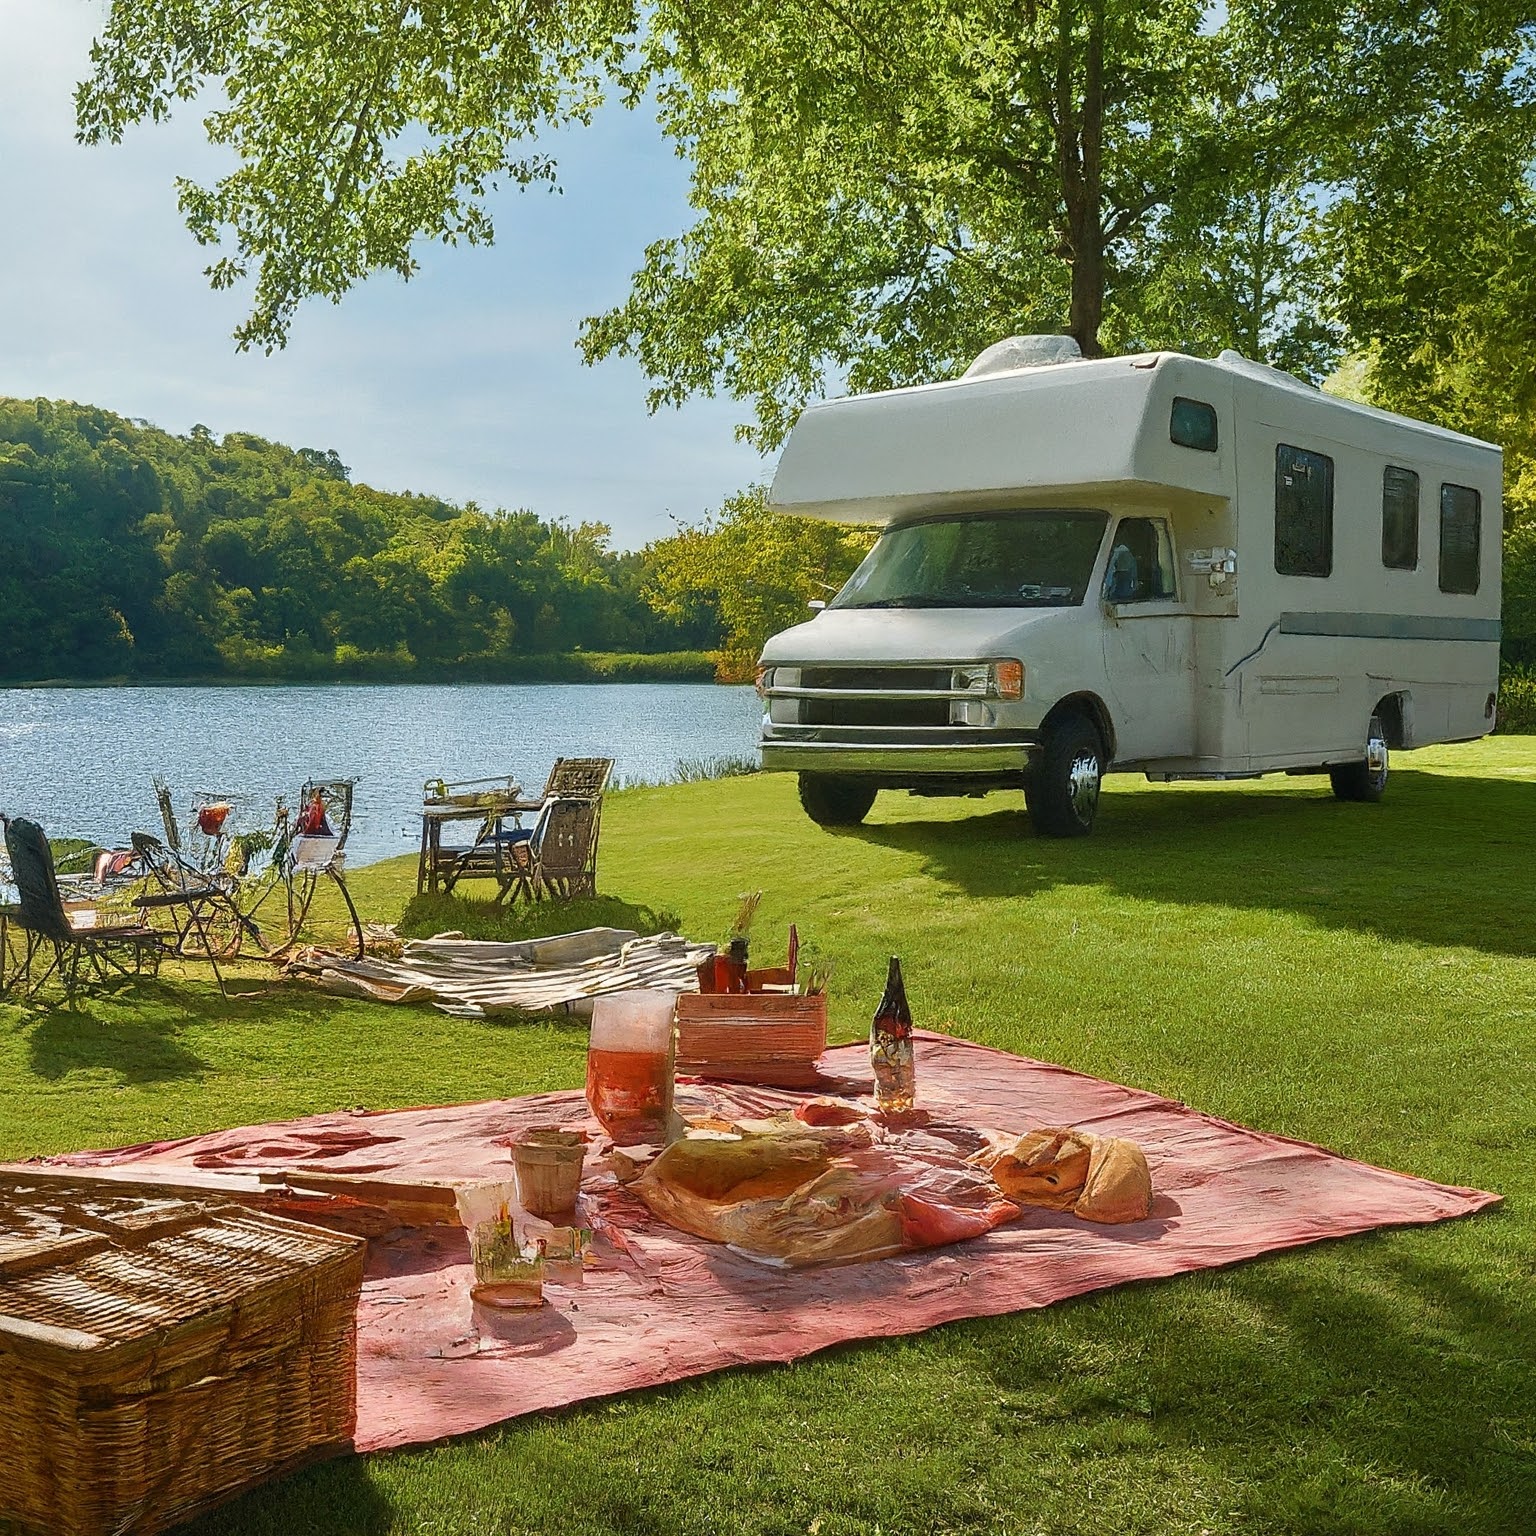 an image of a lakeside picnic spread out in a serene sun-dappled park with a Winnebago parked in the foreground